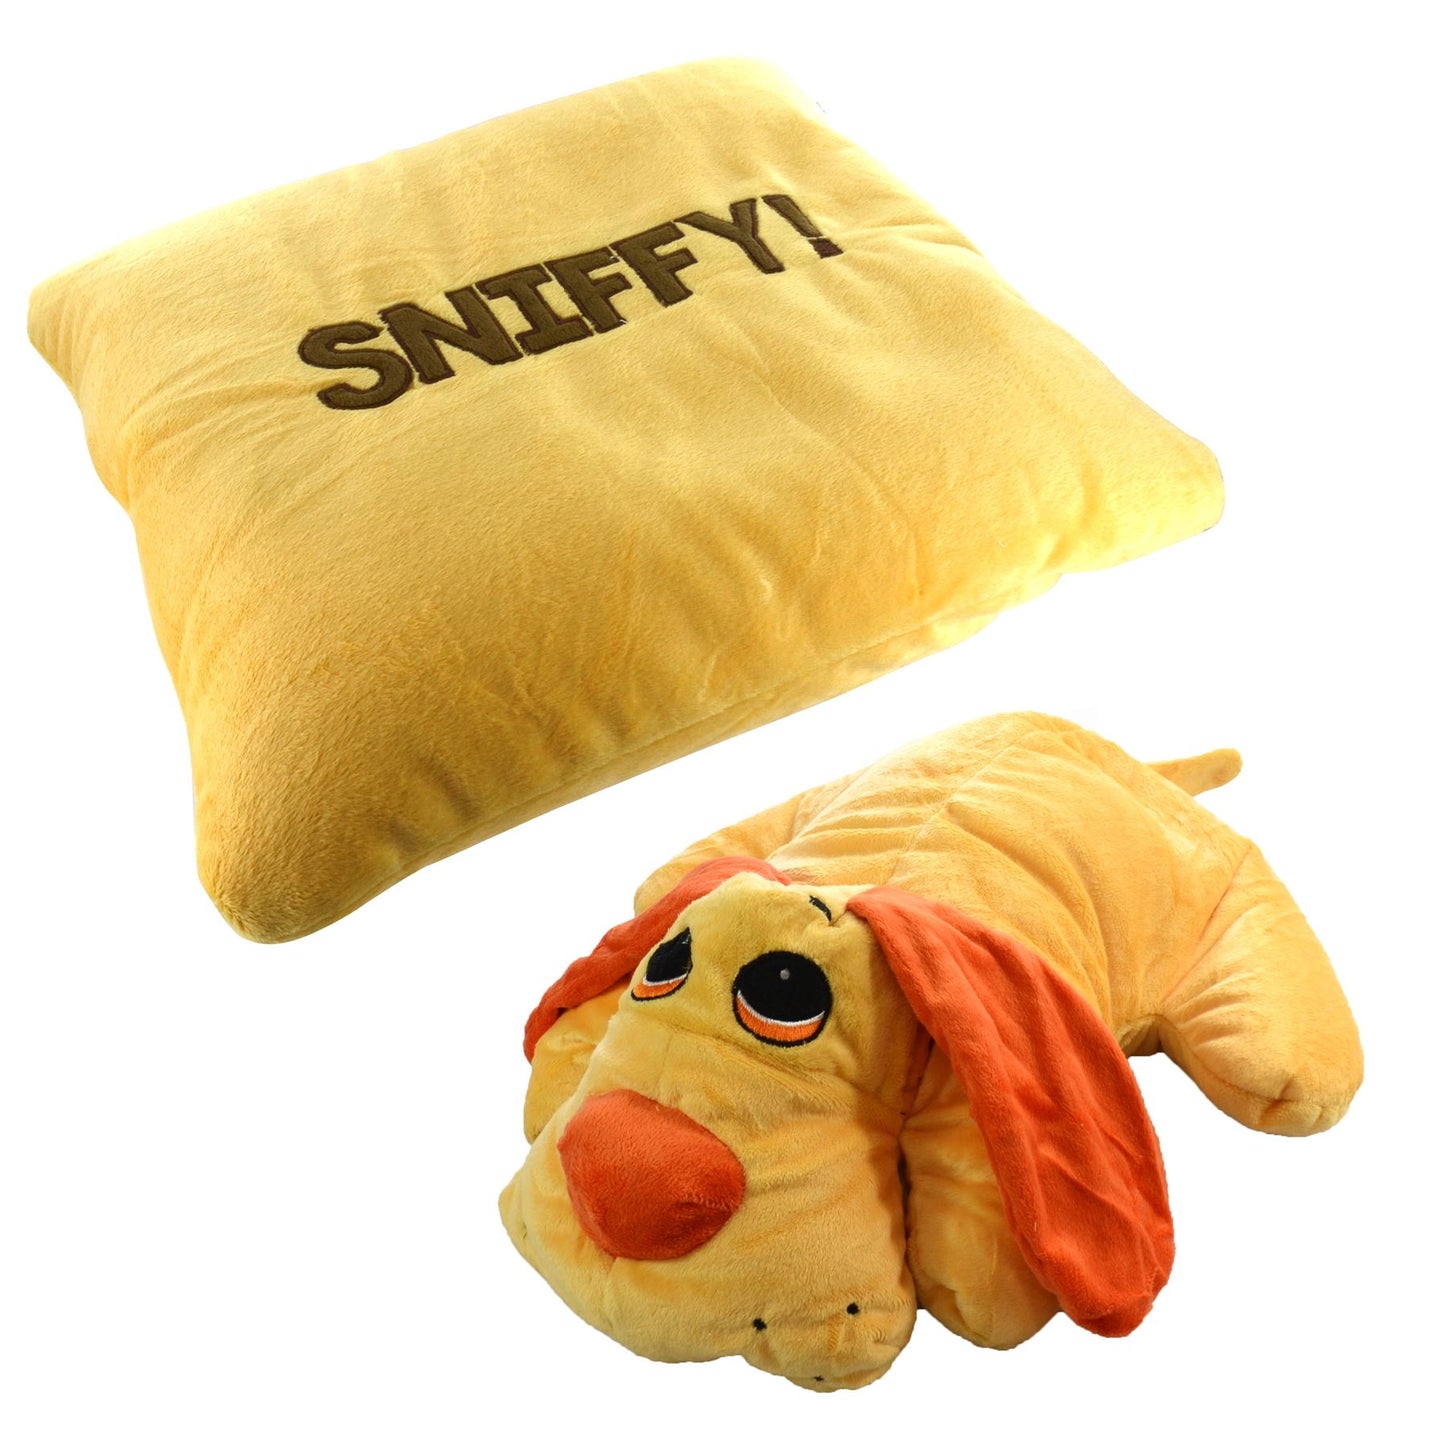 Cuddle Up with a Soft Plush Animal Pillow